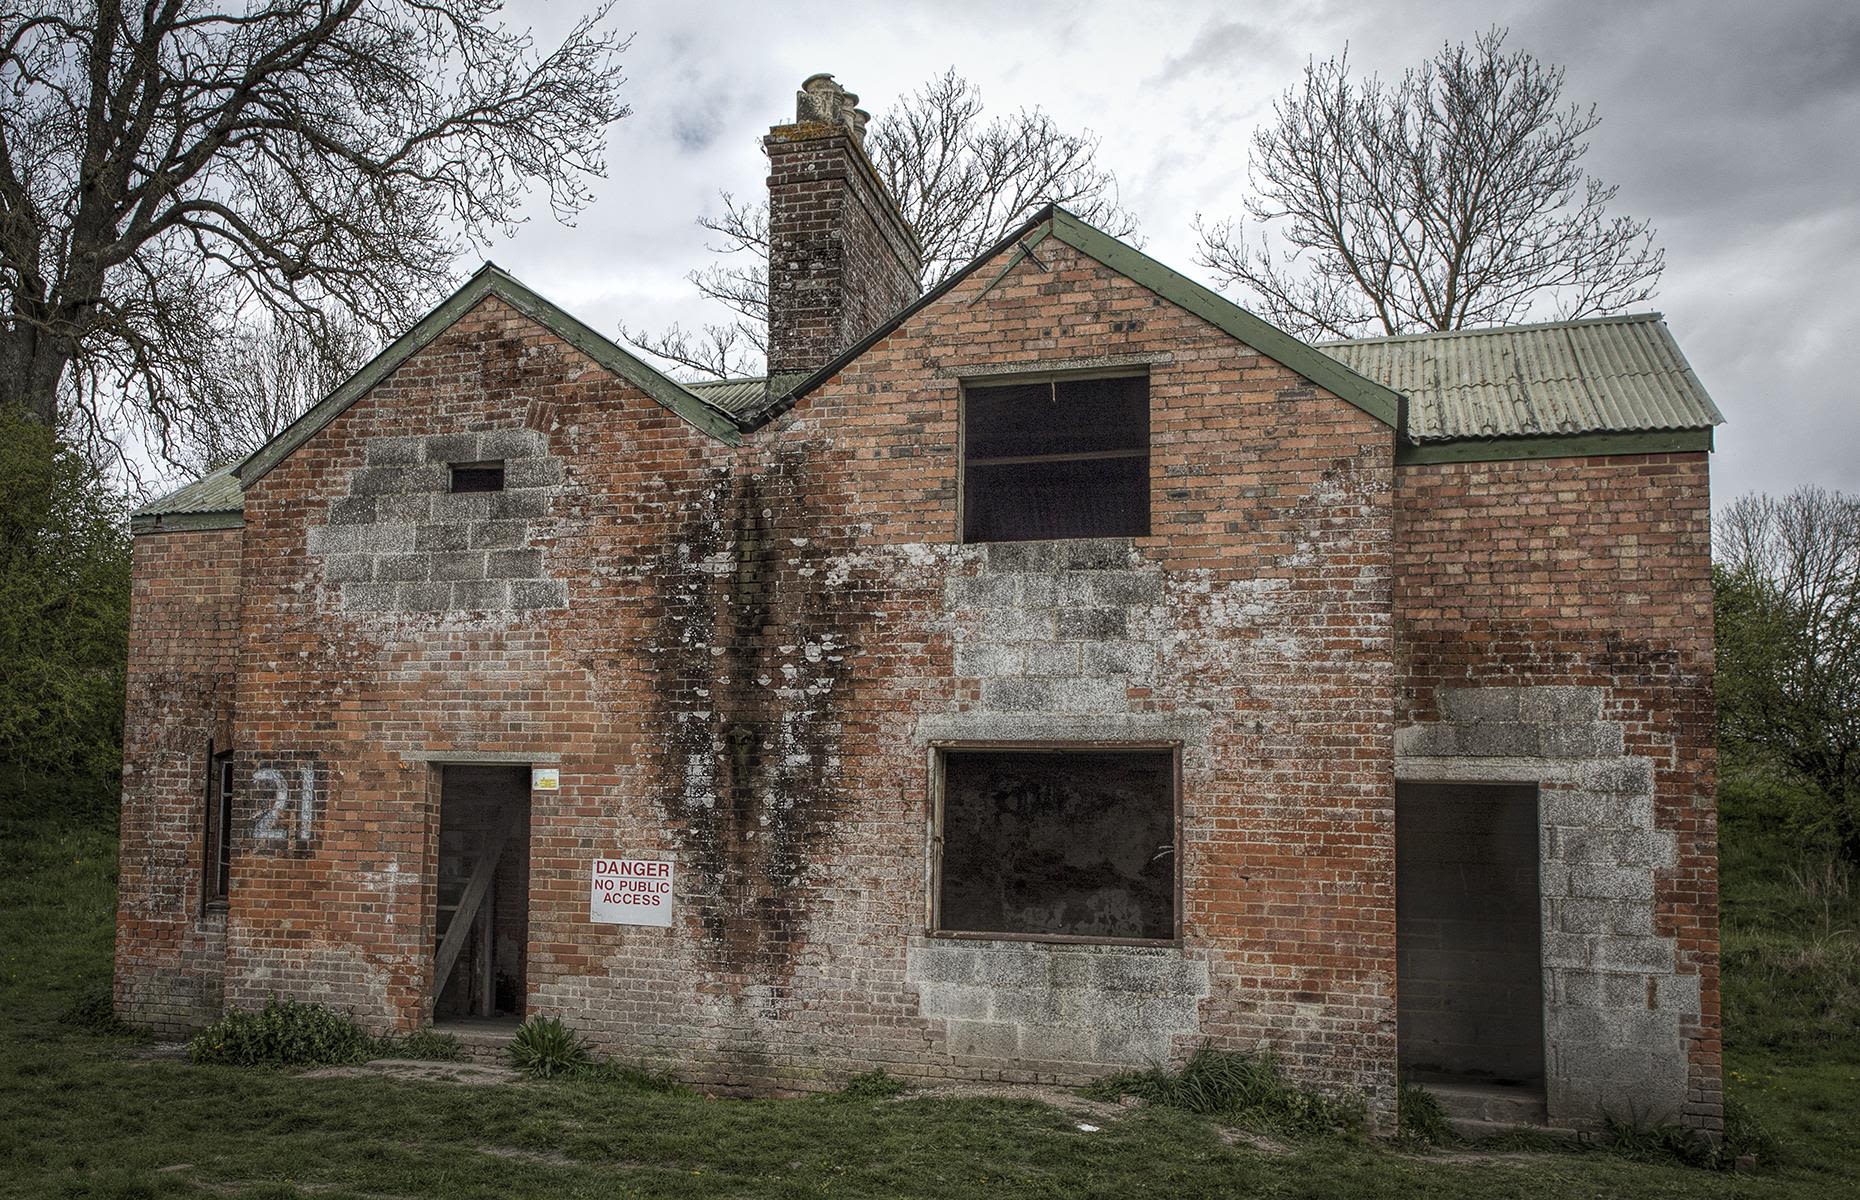 Explore the most mysterious ghost towns in the UK and beyond